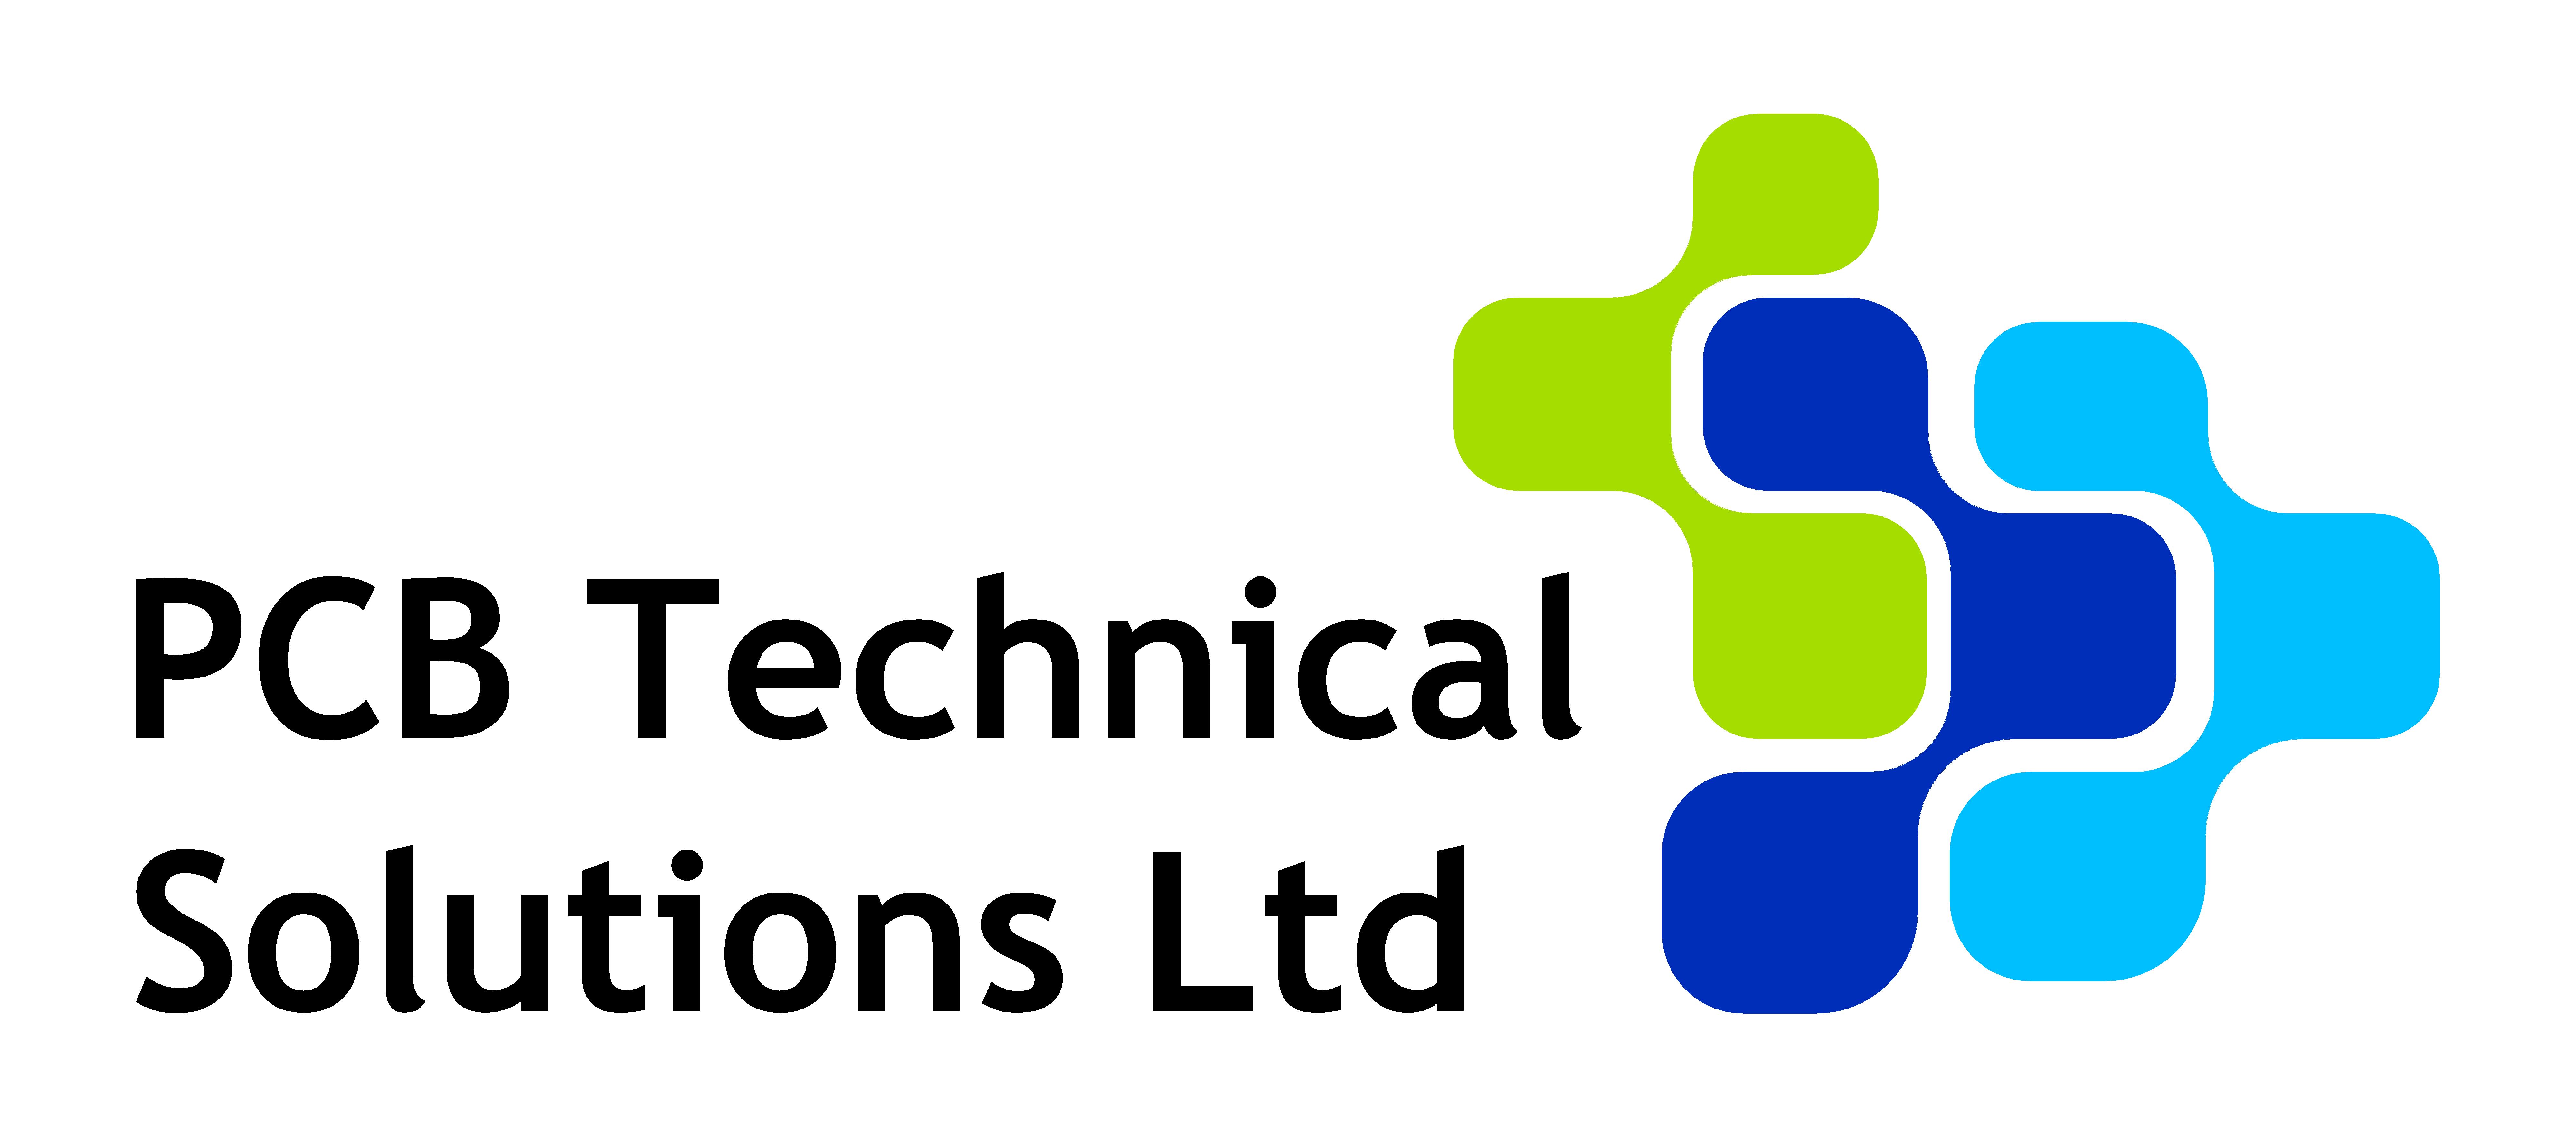 PCB Technical Solutions logo